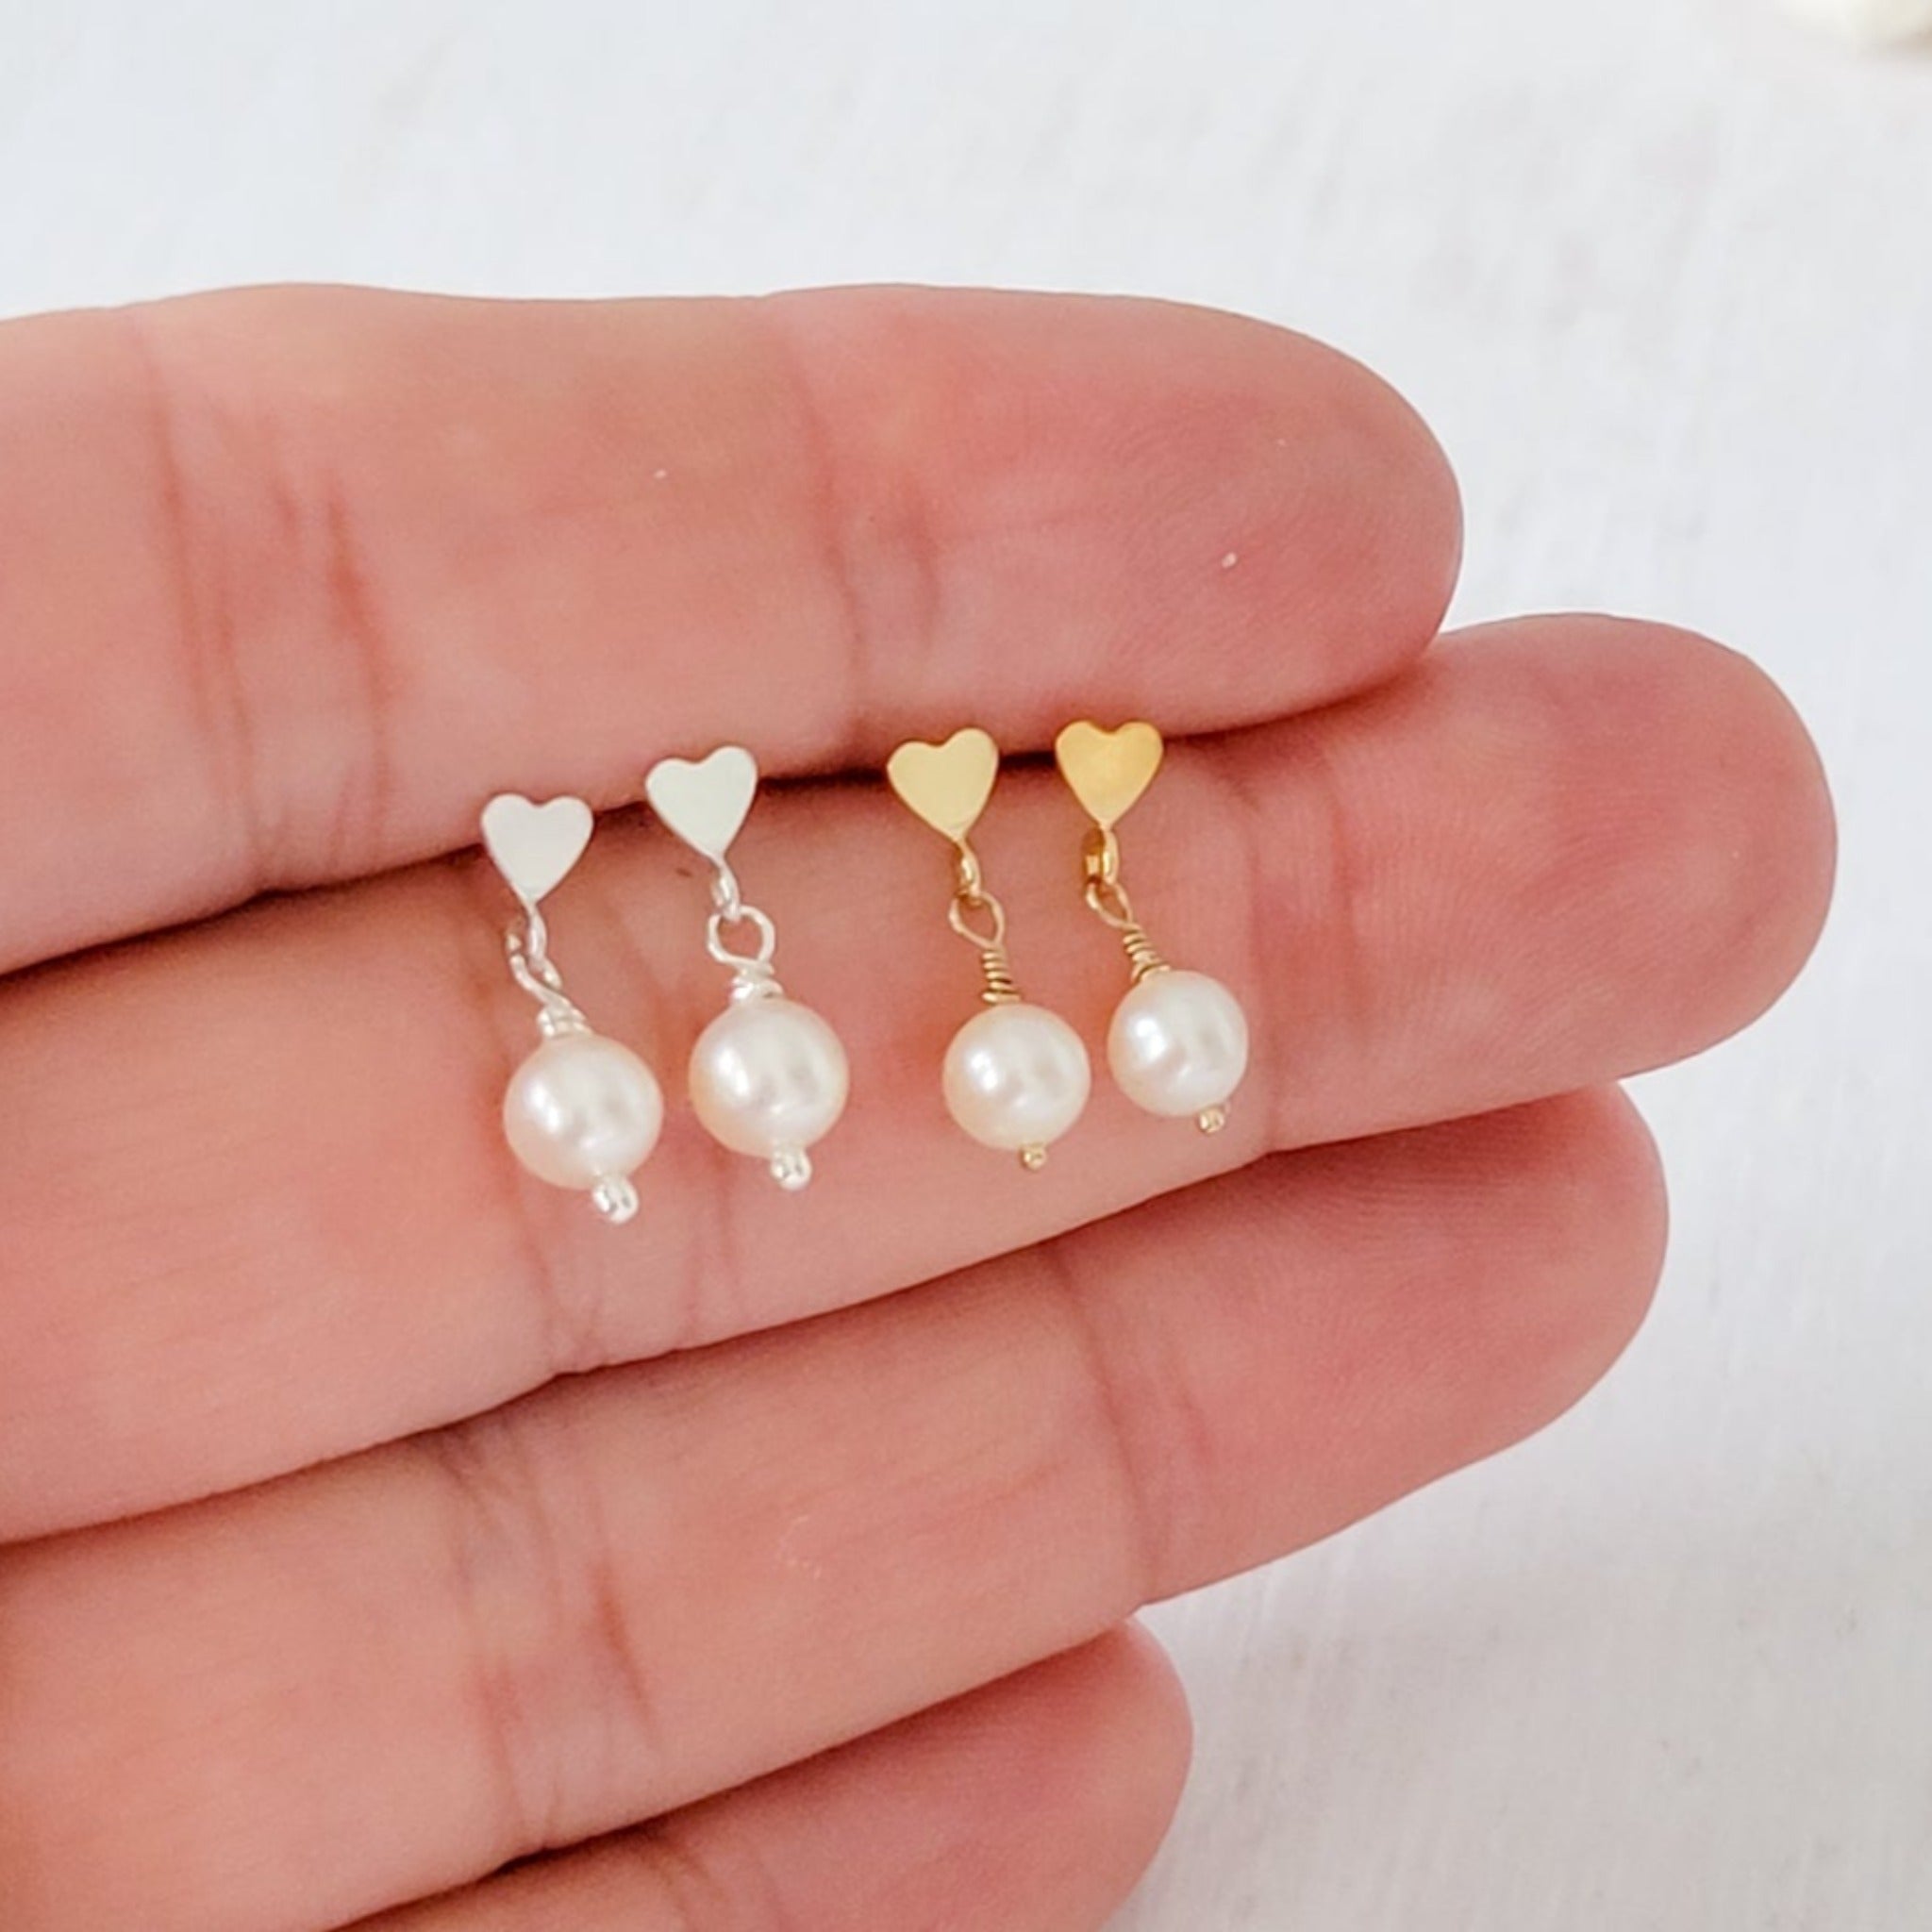 Babies/Children's Tiny Heart and Pearl Dangle Earrings - Sterling, Gold, or Rose Gold